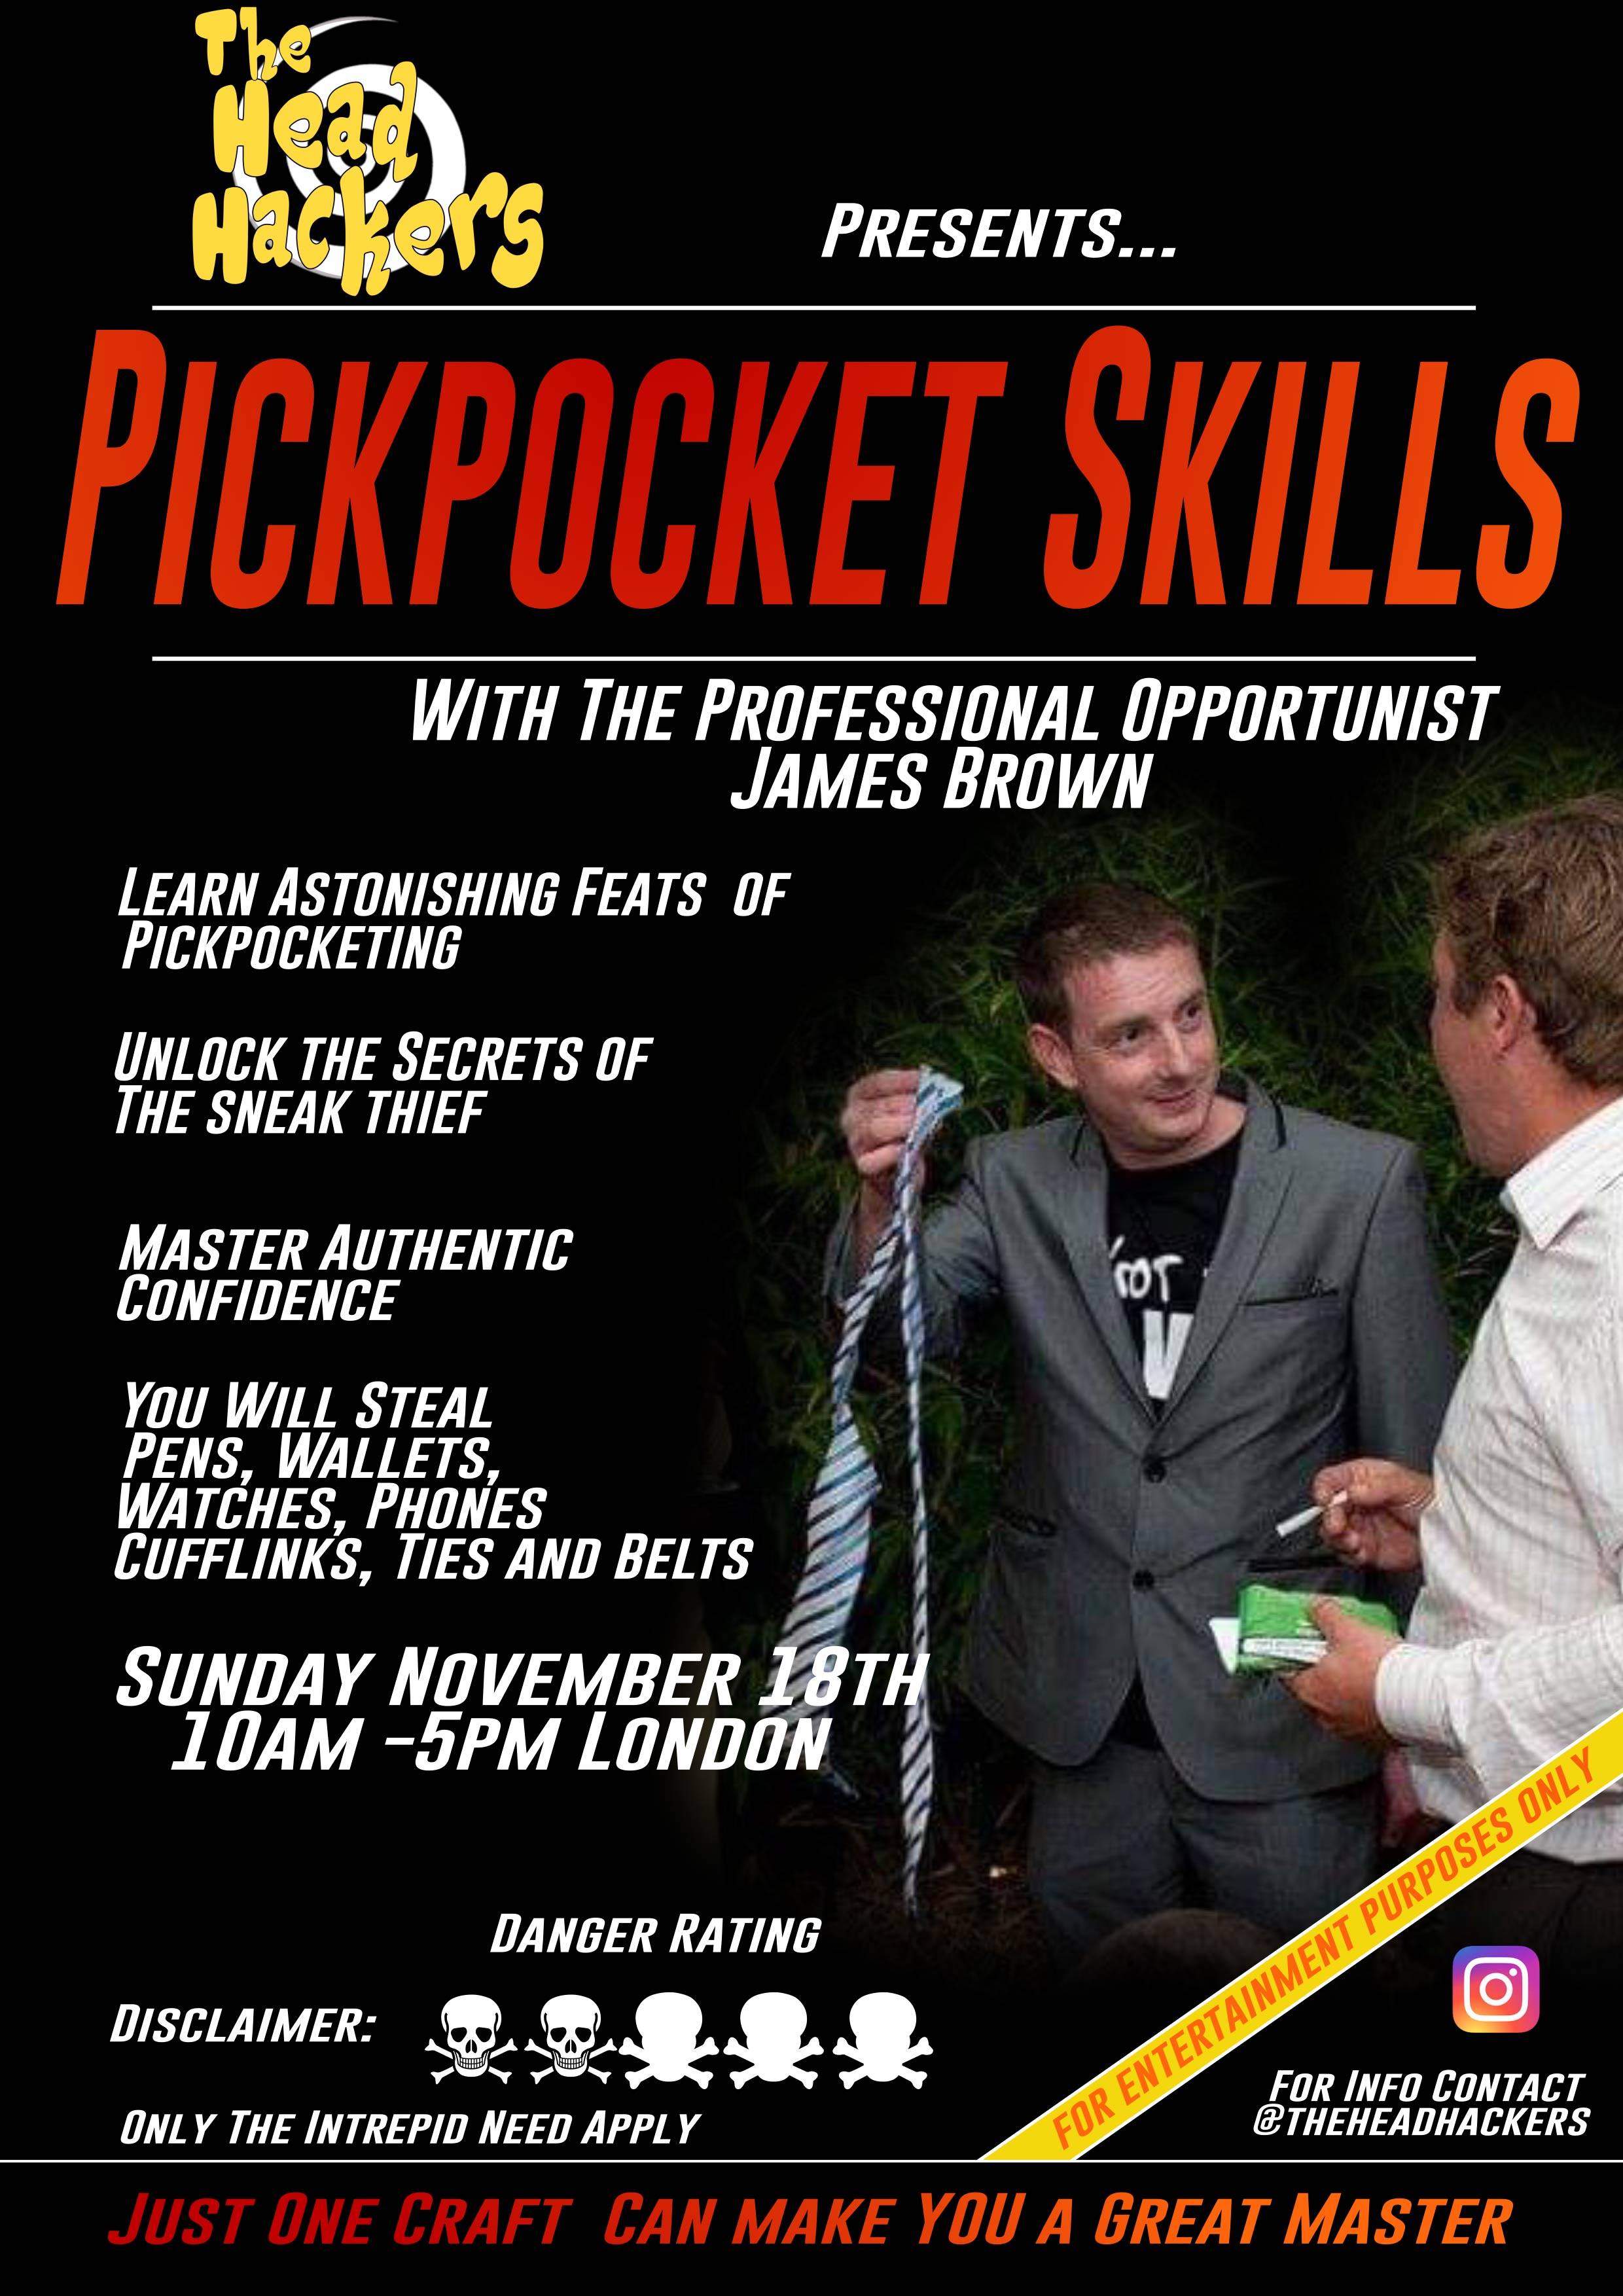 How to pickpocket for fun and profit